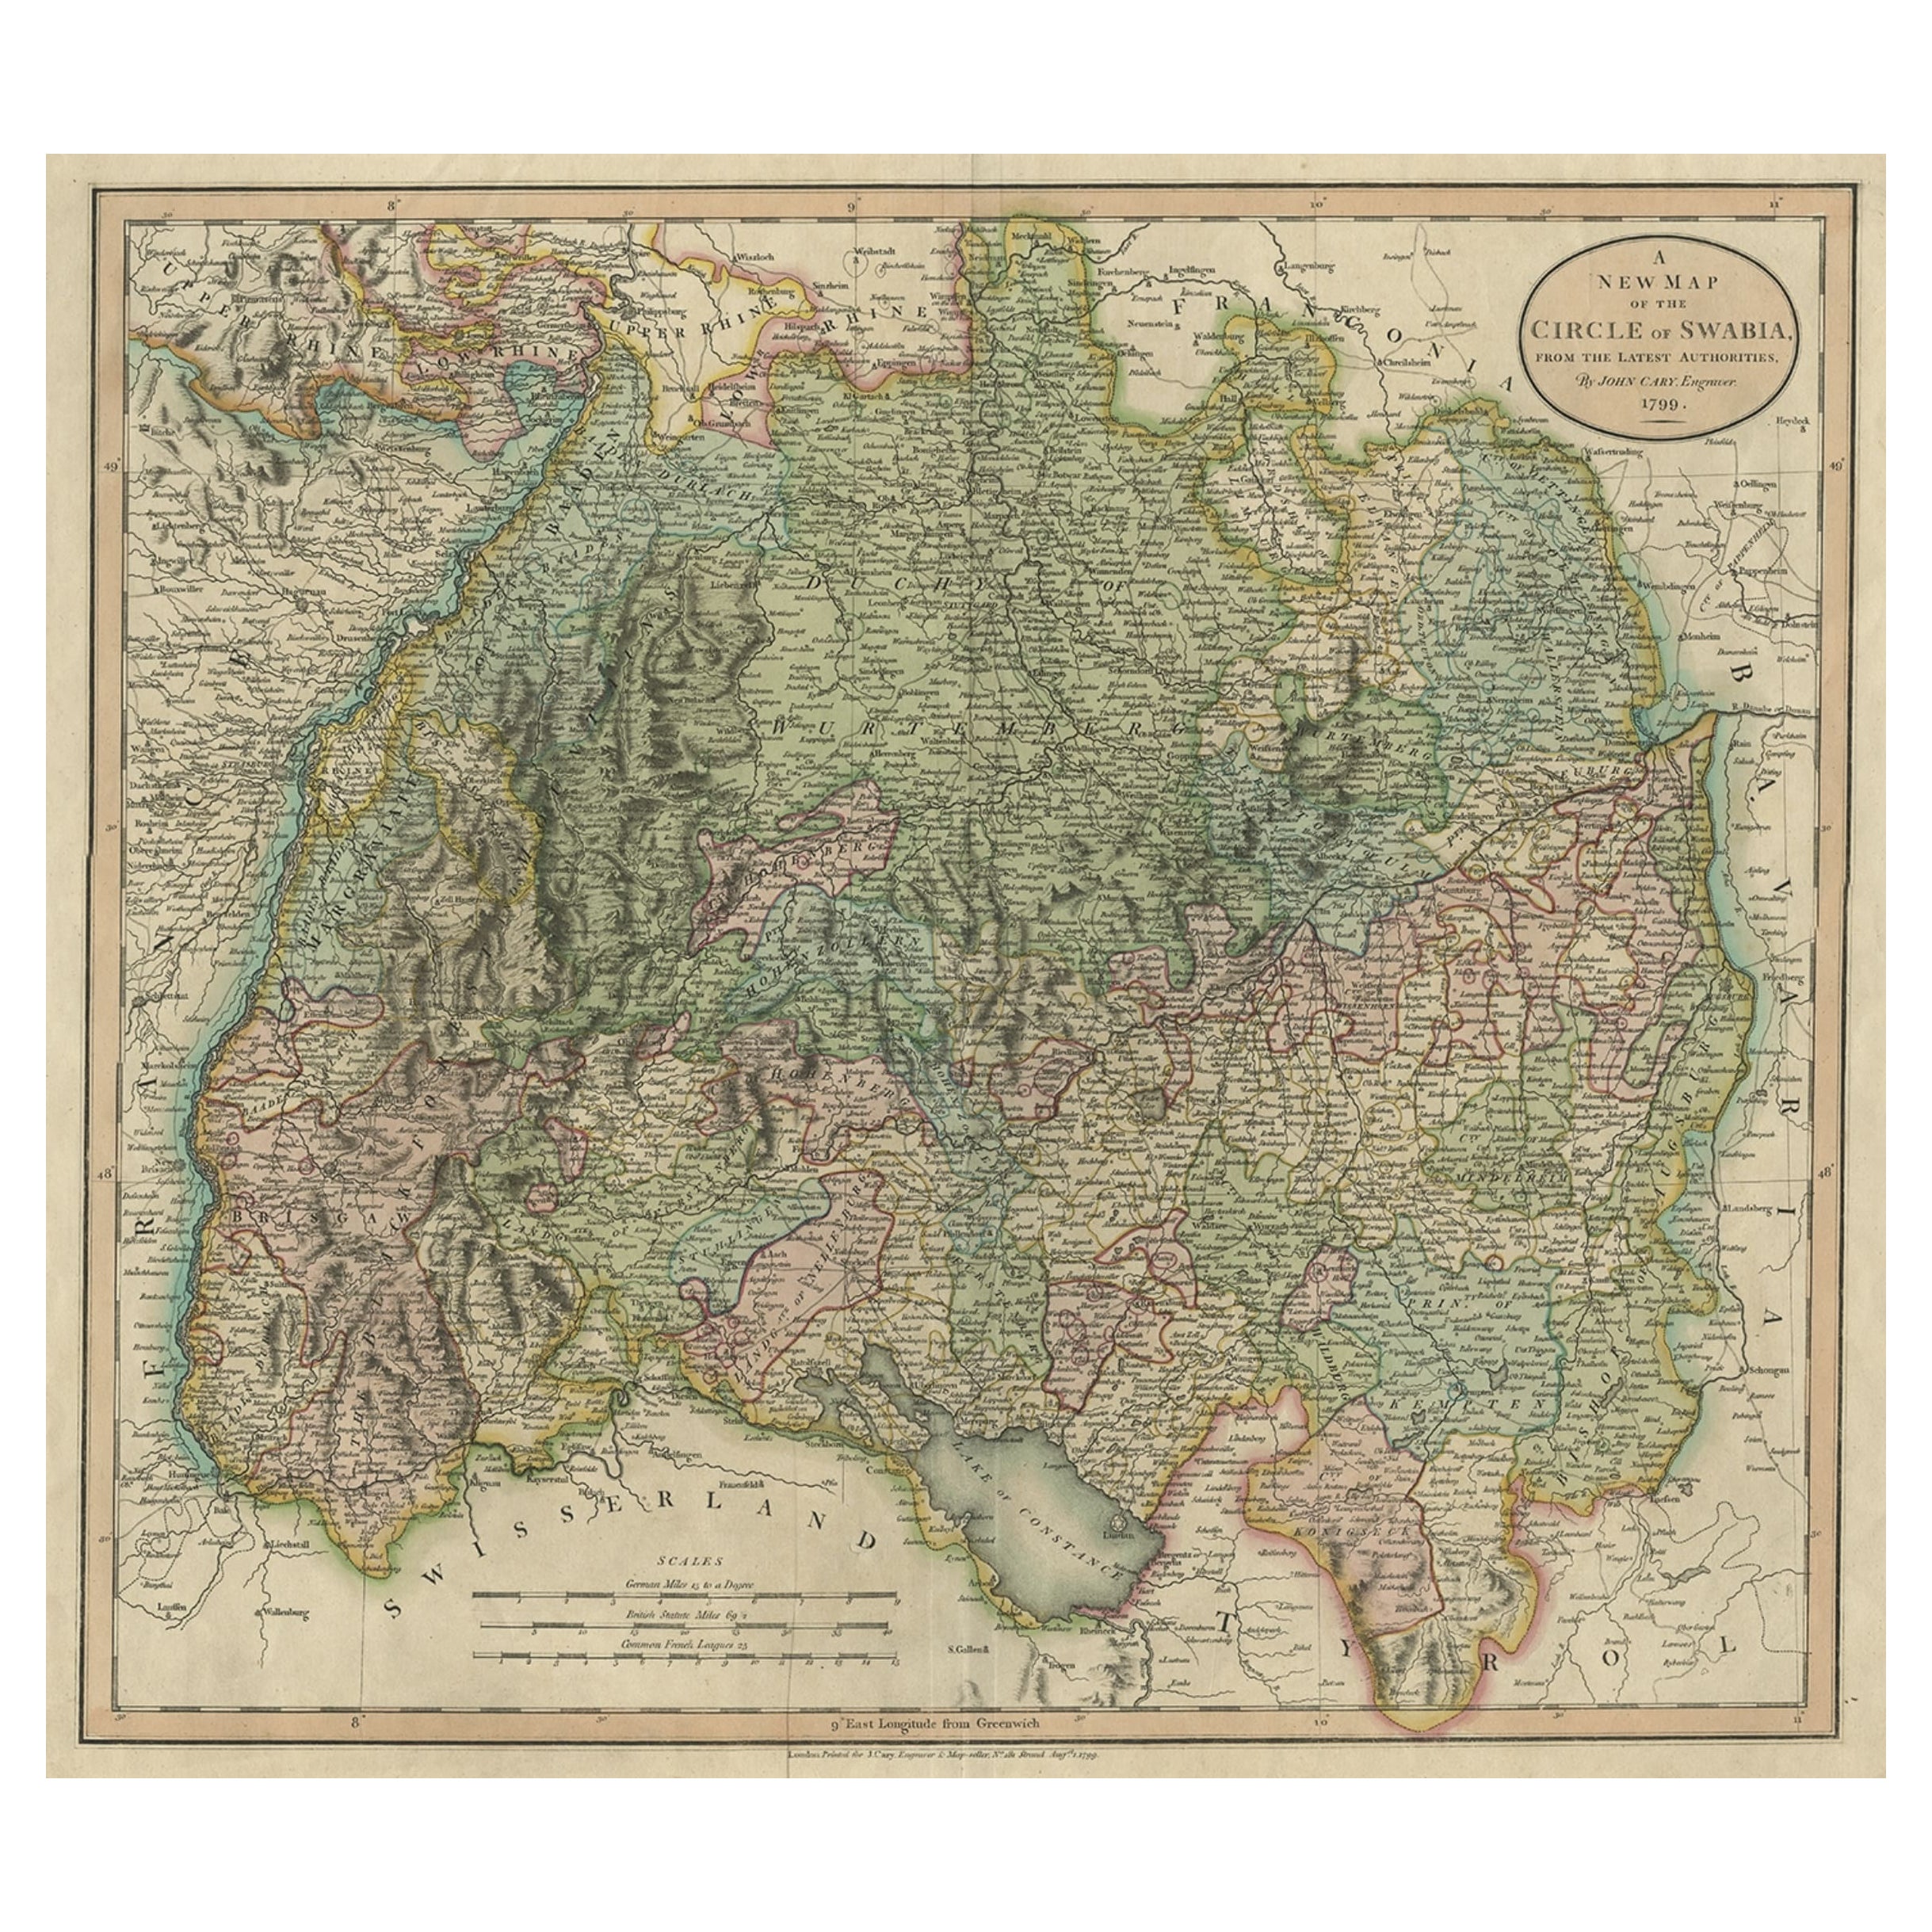 Attractive Original Hand-Colored Map of the Swabia Region of Germany, 1799 For Sale